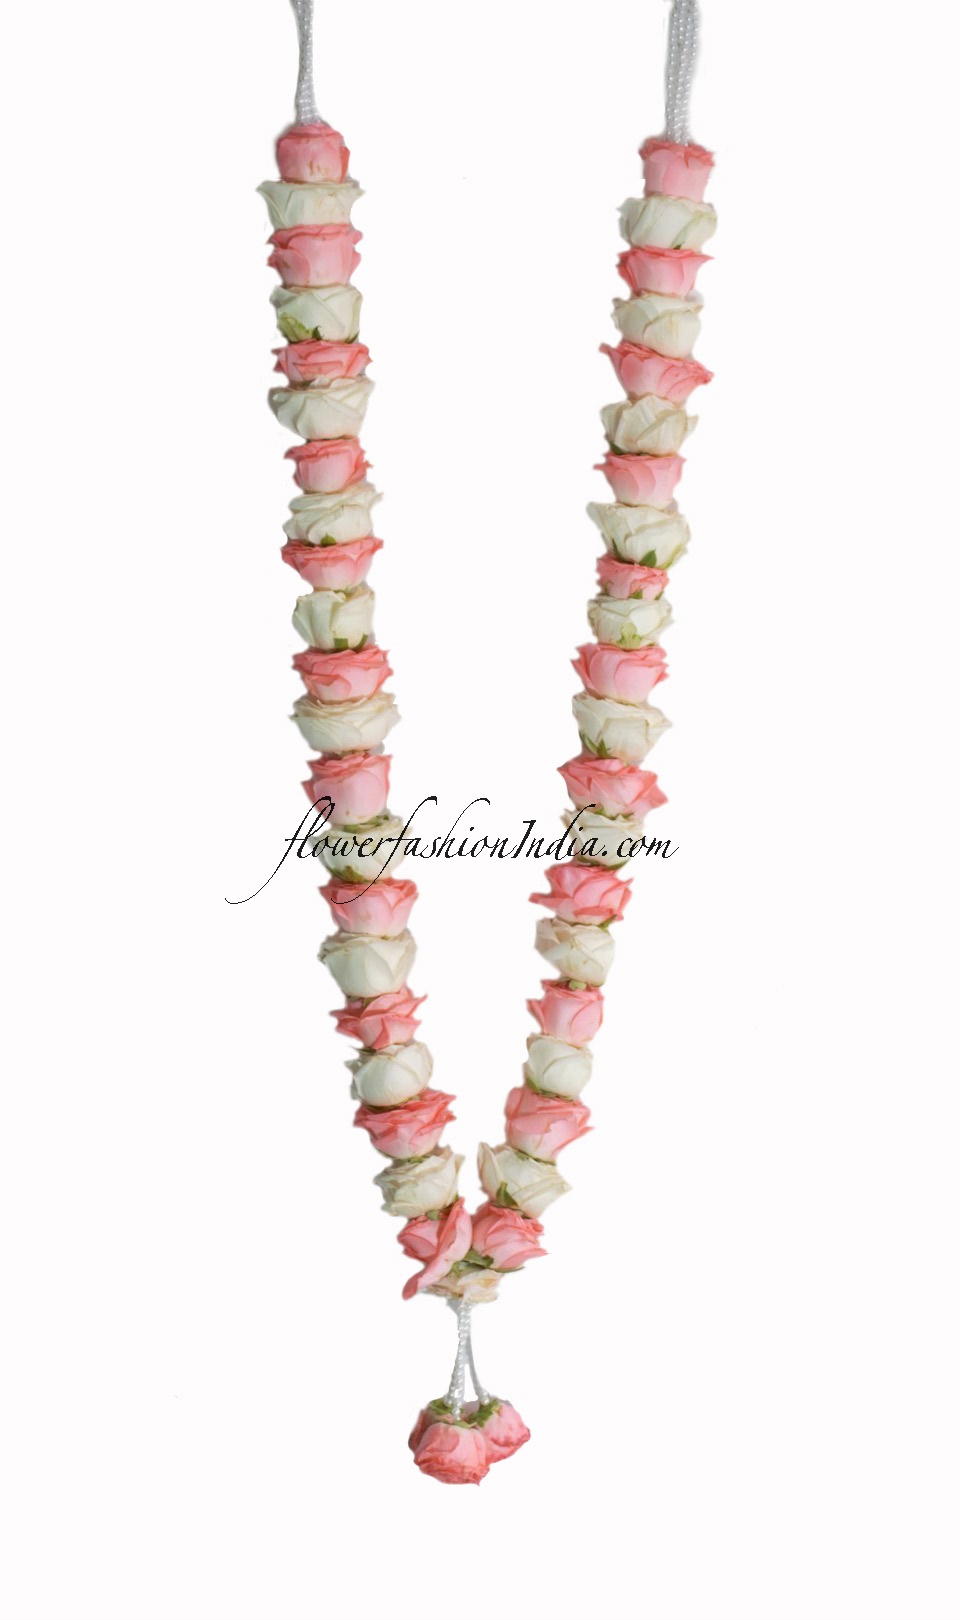 Multi-Purpose White And Pink Rose Flower Garland Available At Our ...